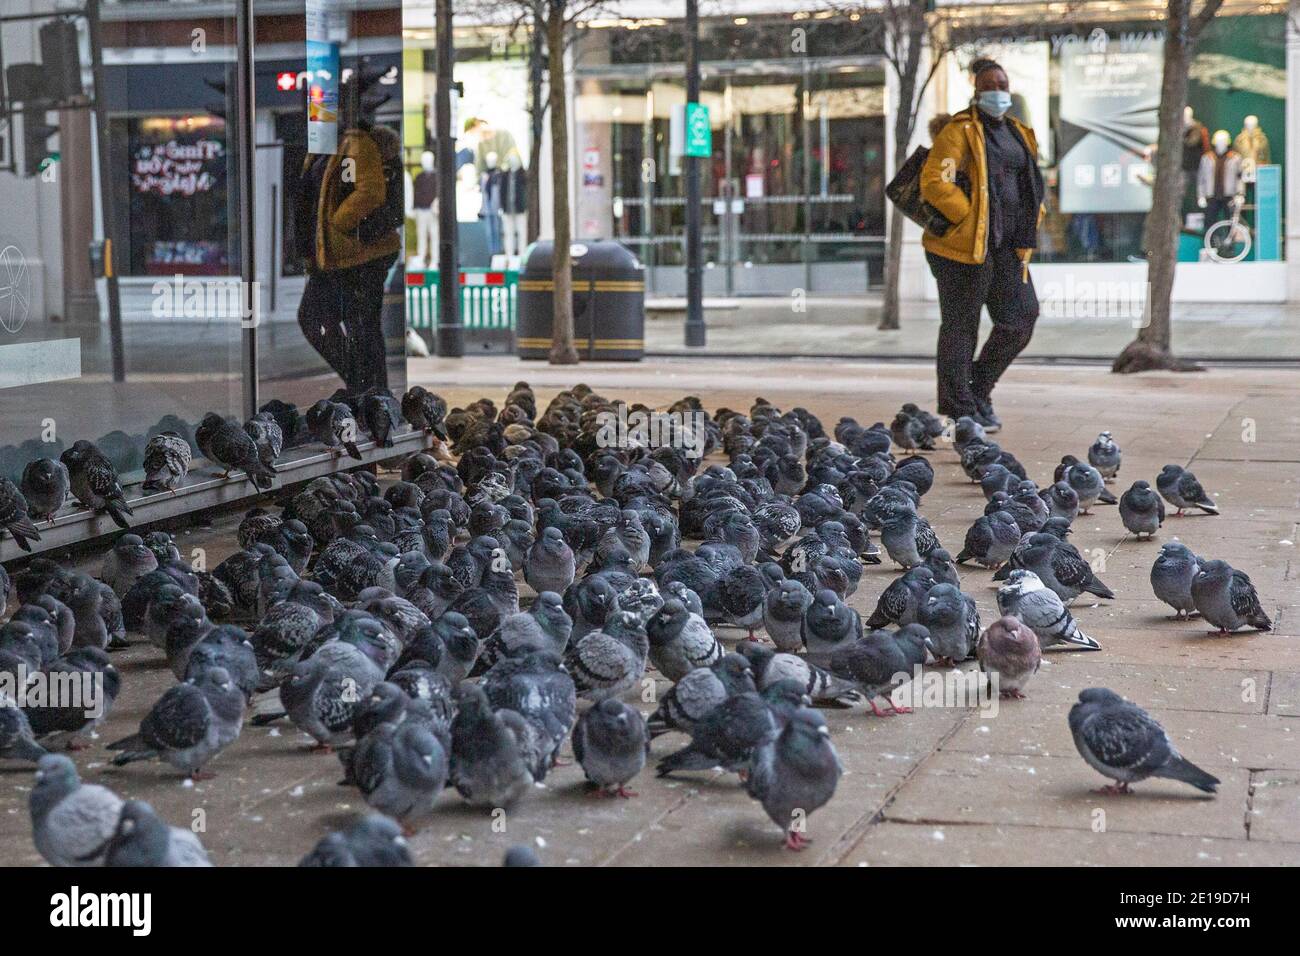 A masked woman walks past a flock of pigeons on Central London’s Oxford Street on the morning of the 5th of January 2021 as the National lockdown take Stock Photo